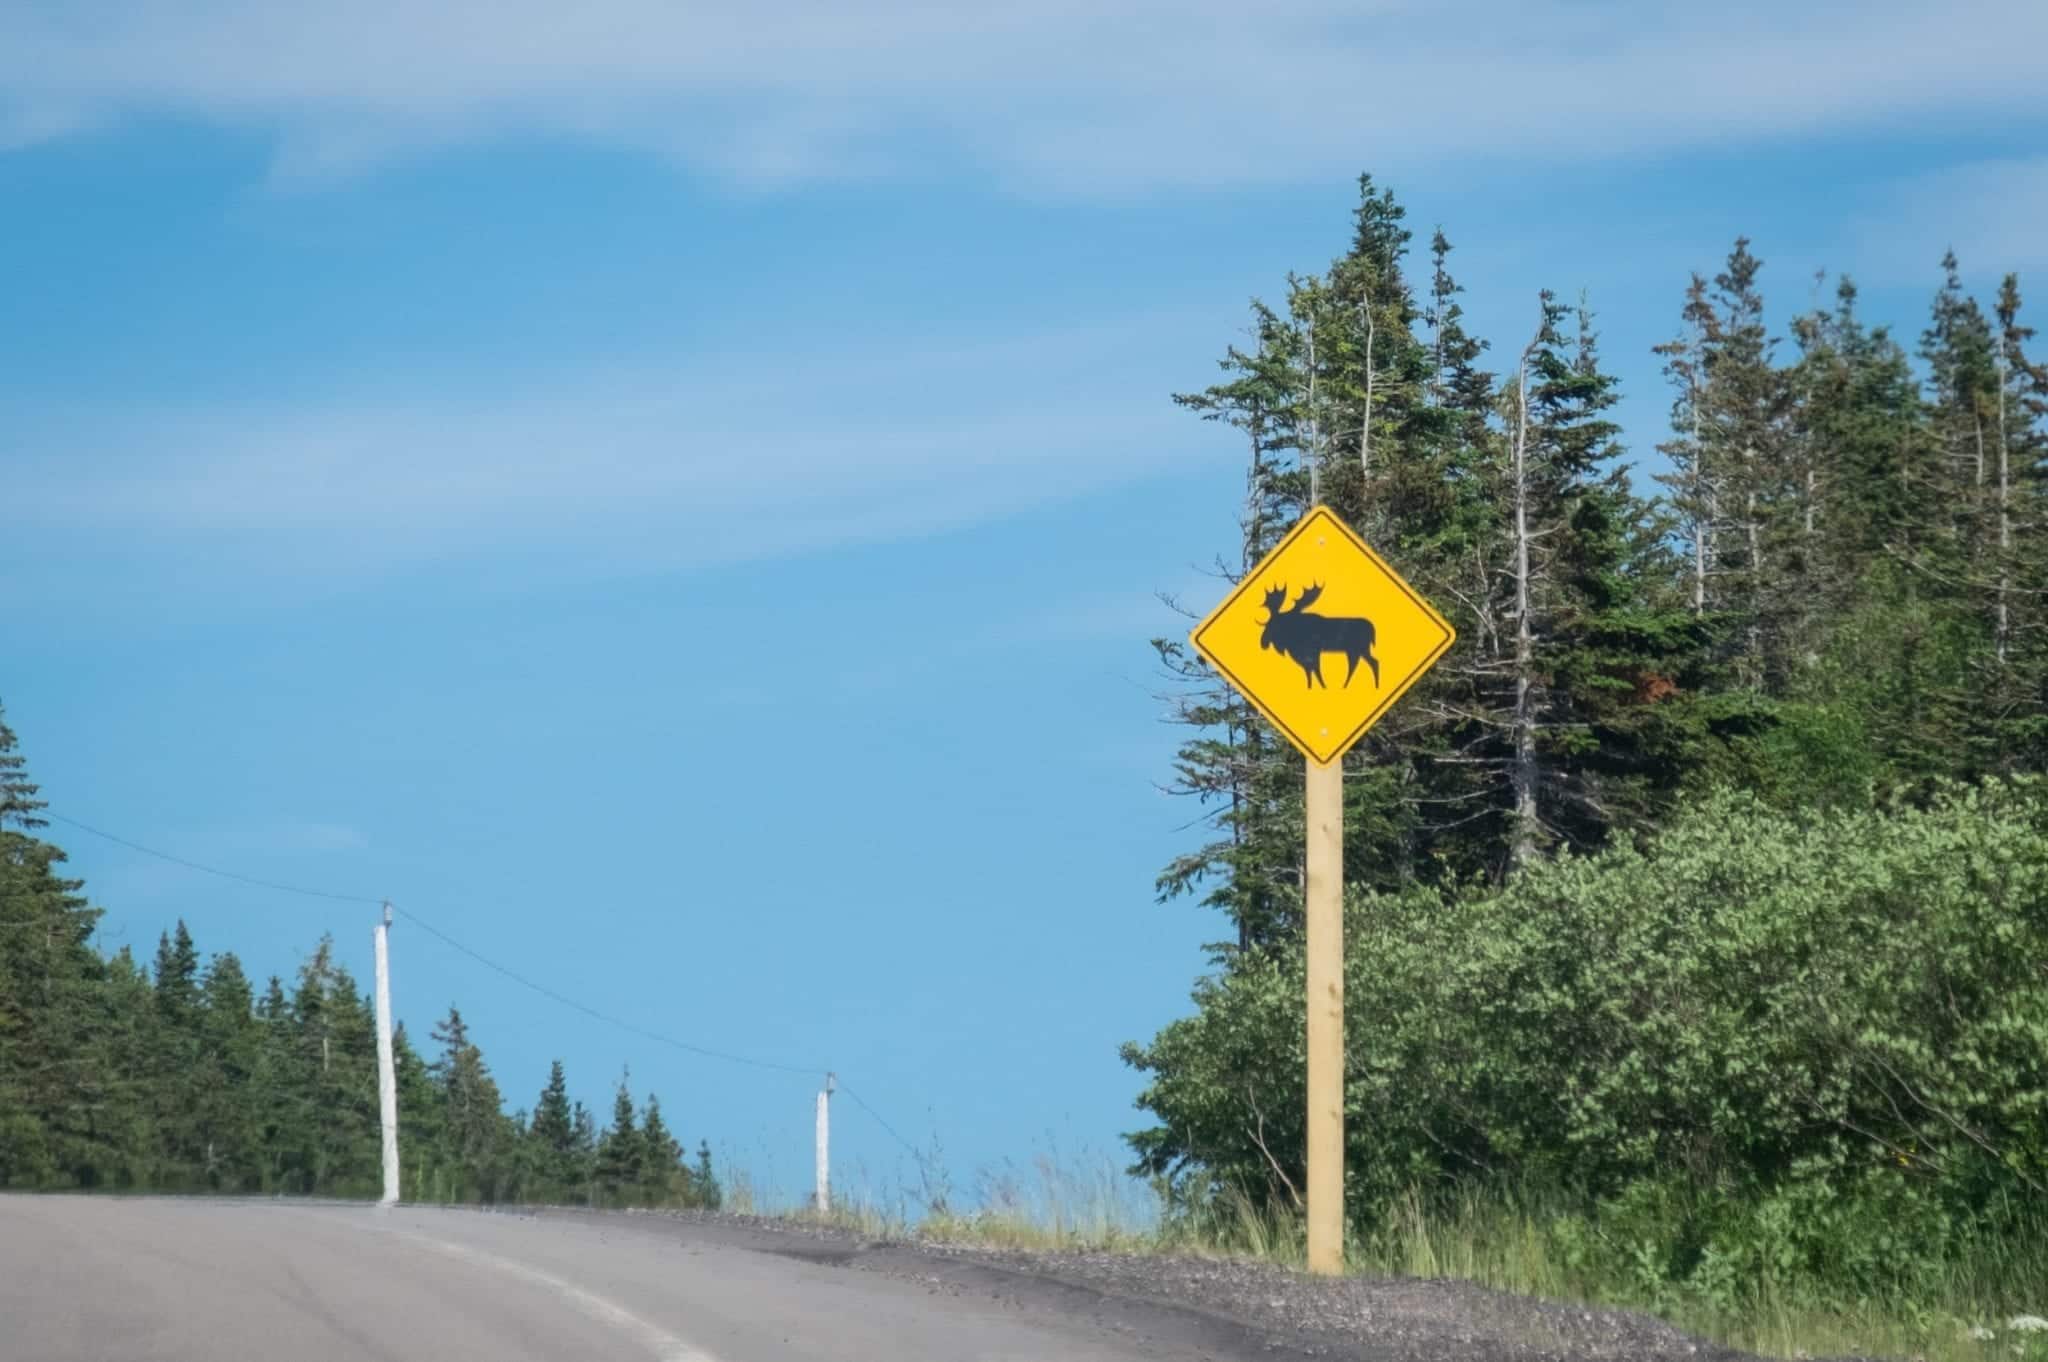 A yellow "Brake for Moose" sign with a moose in the middle of it, o the side road in Cape Breton, Nova Scotia.